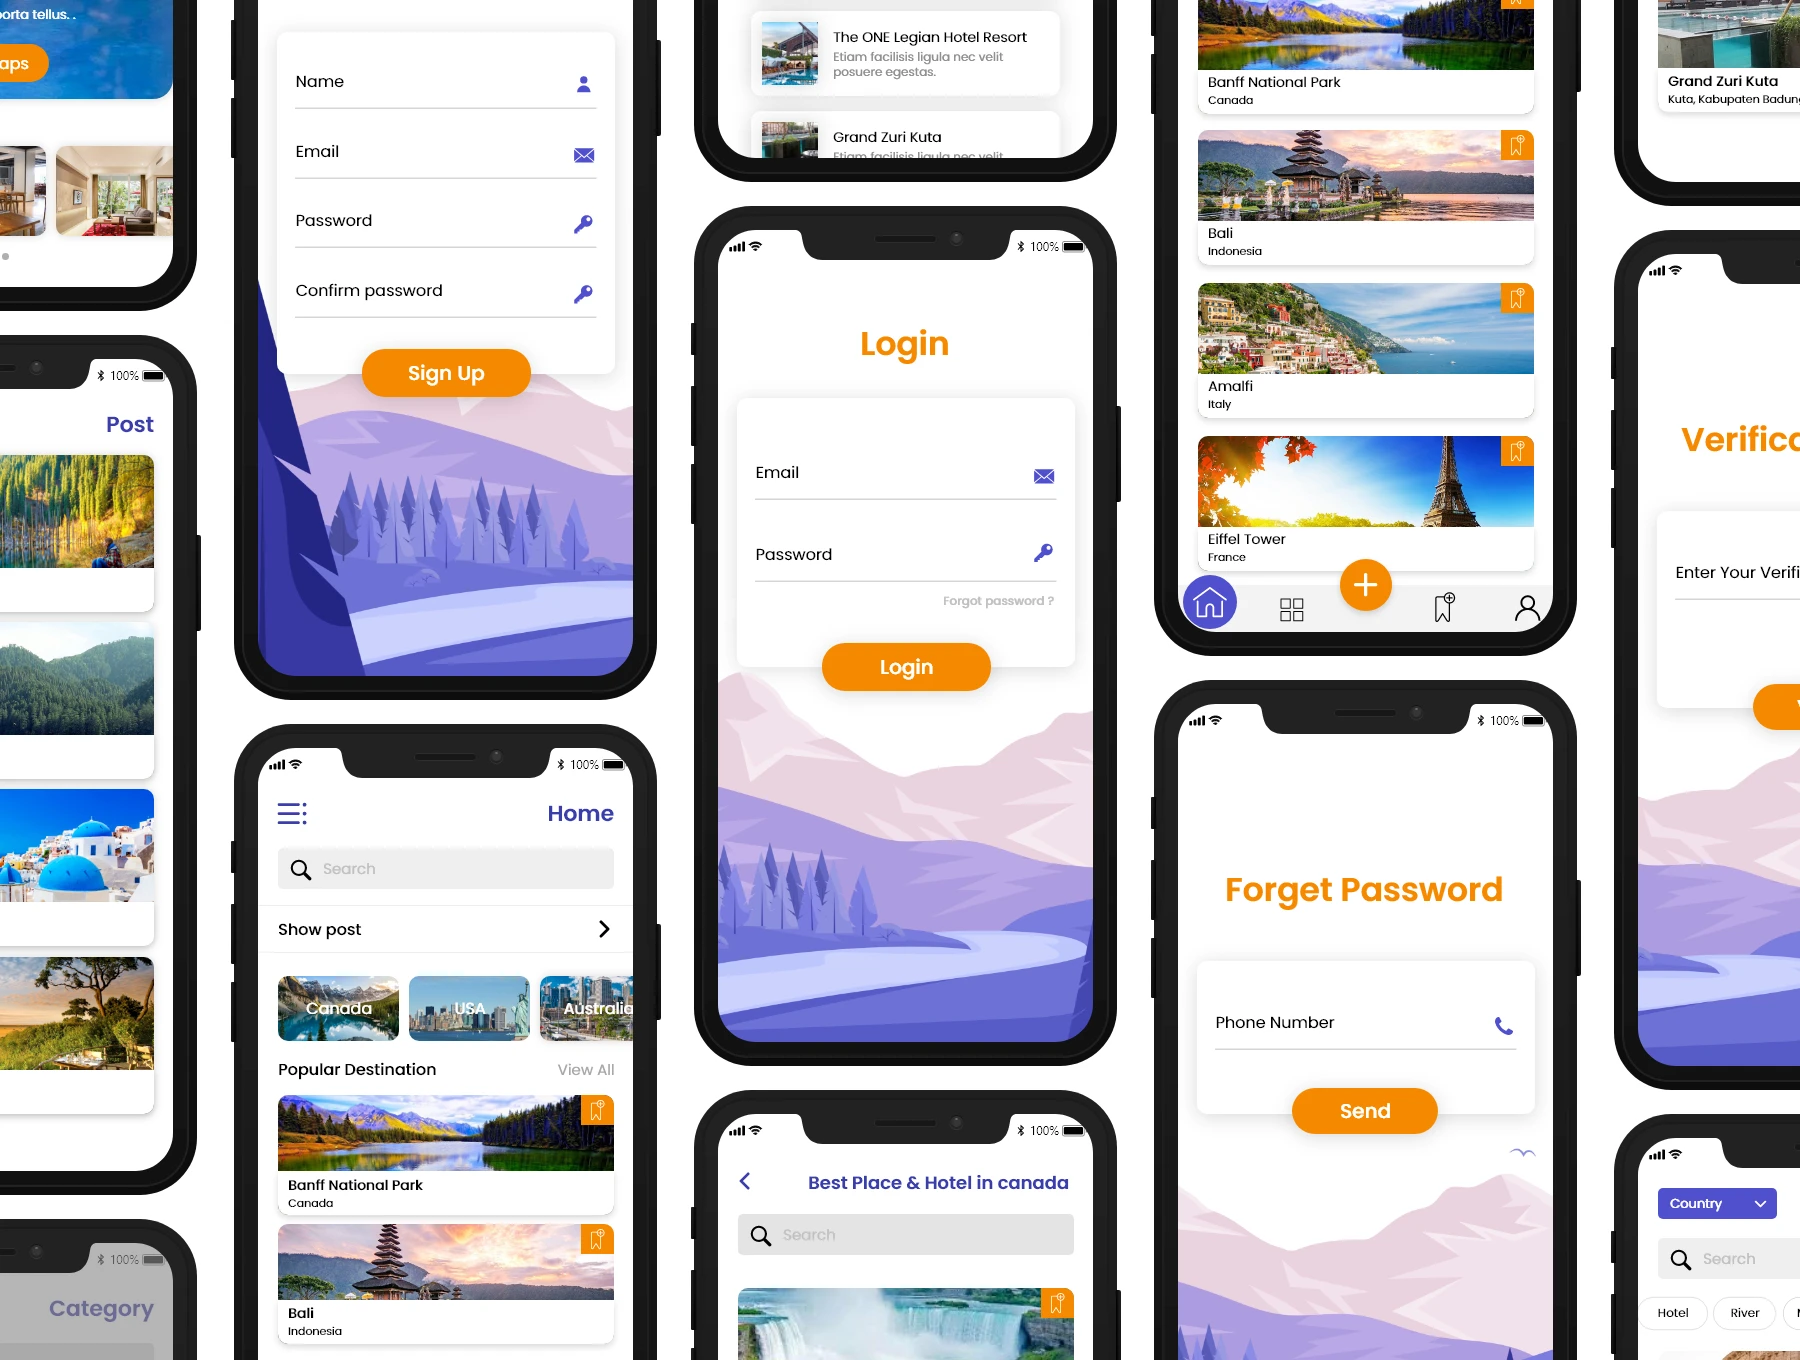 Travel App for Adobe XD - Crafted carefully with all possible features related to travel information services. It contains totally 28 screens. Each screen is fully customizable, easy to use and carefully layered and organized in Adobe XD.